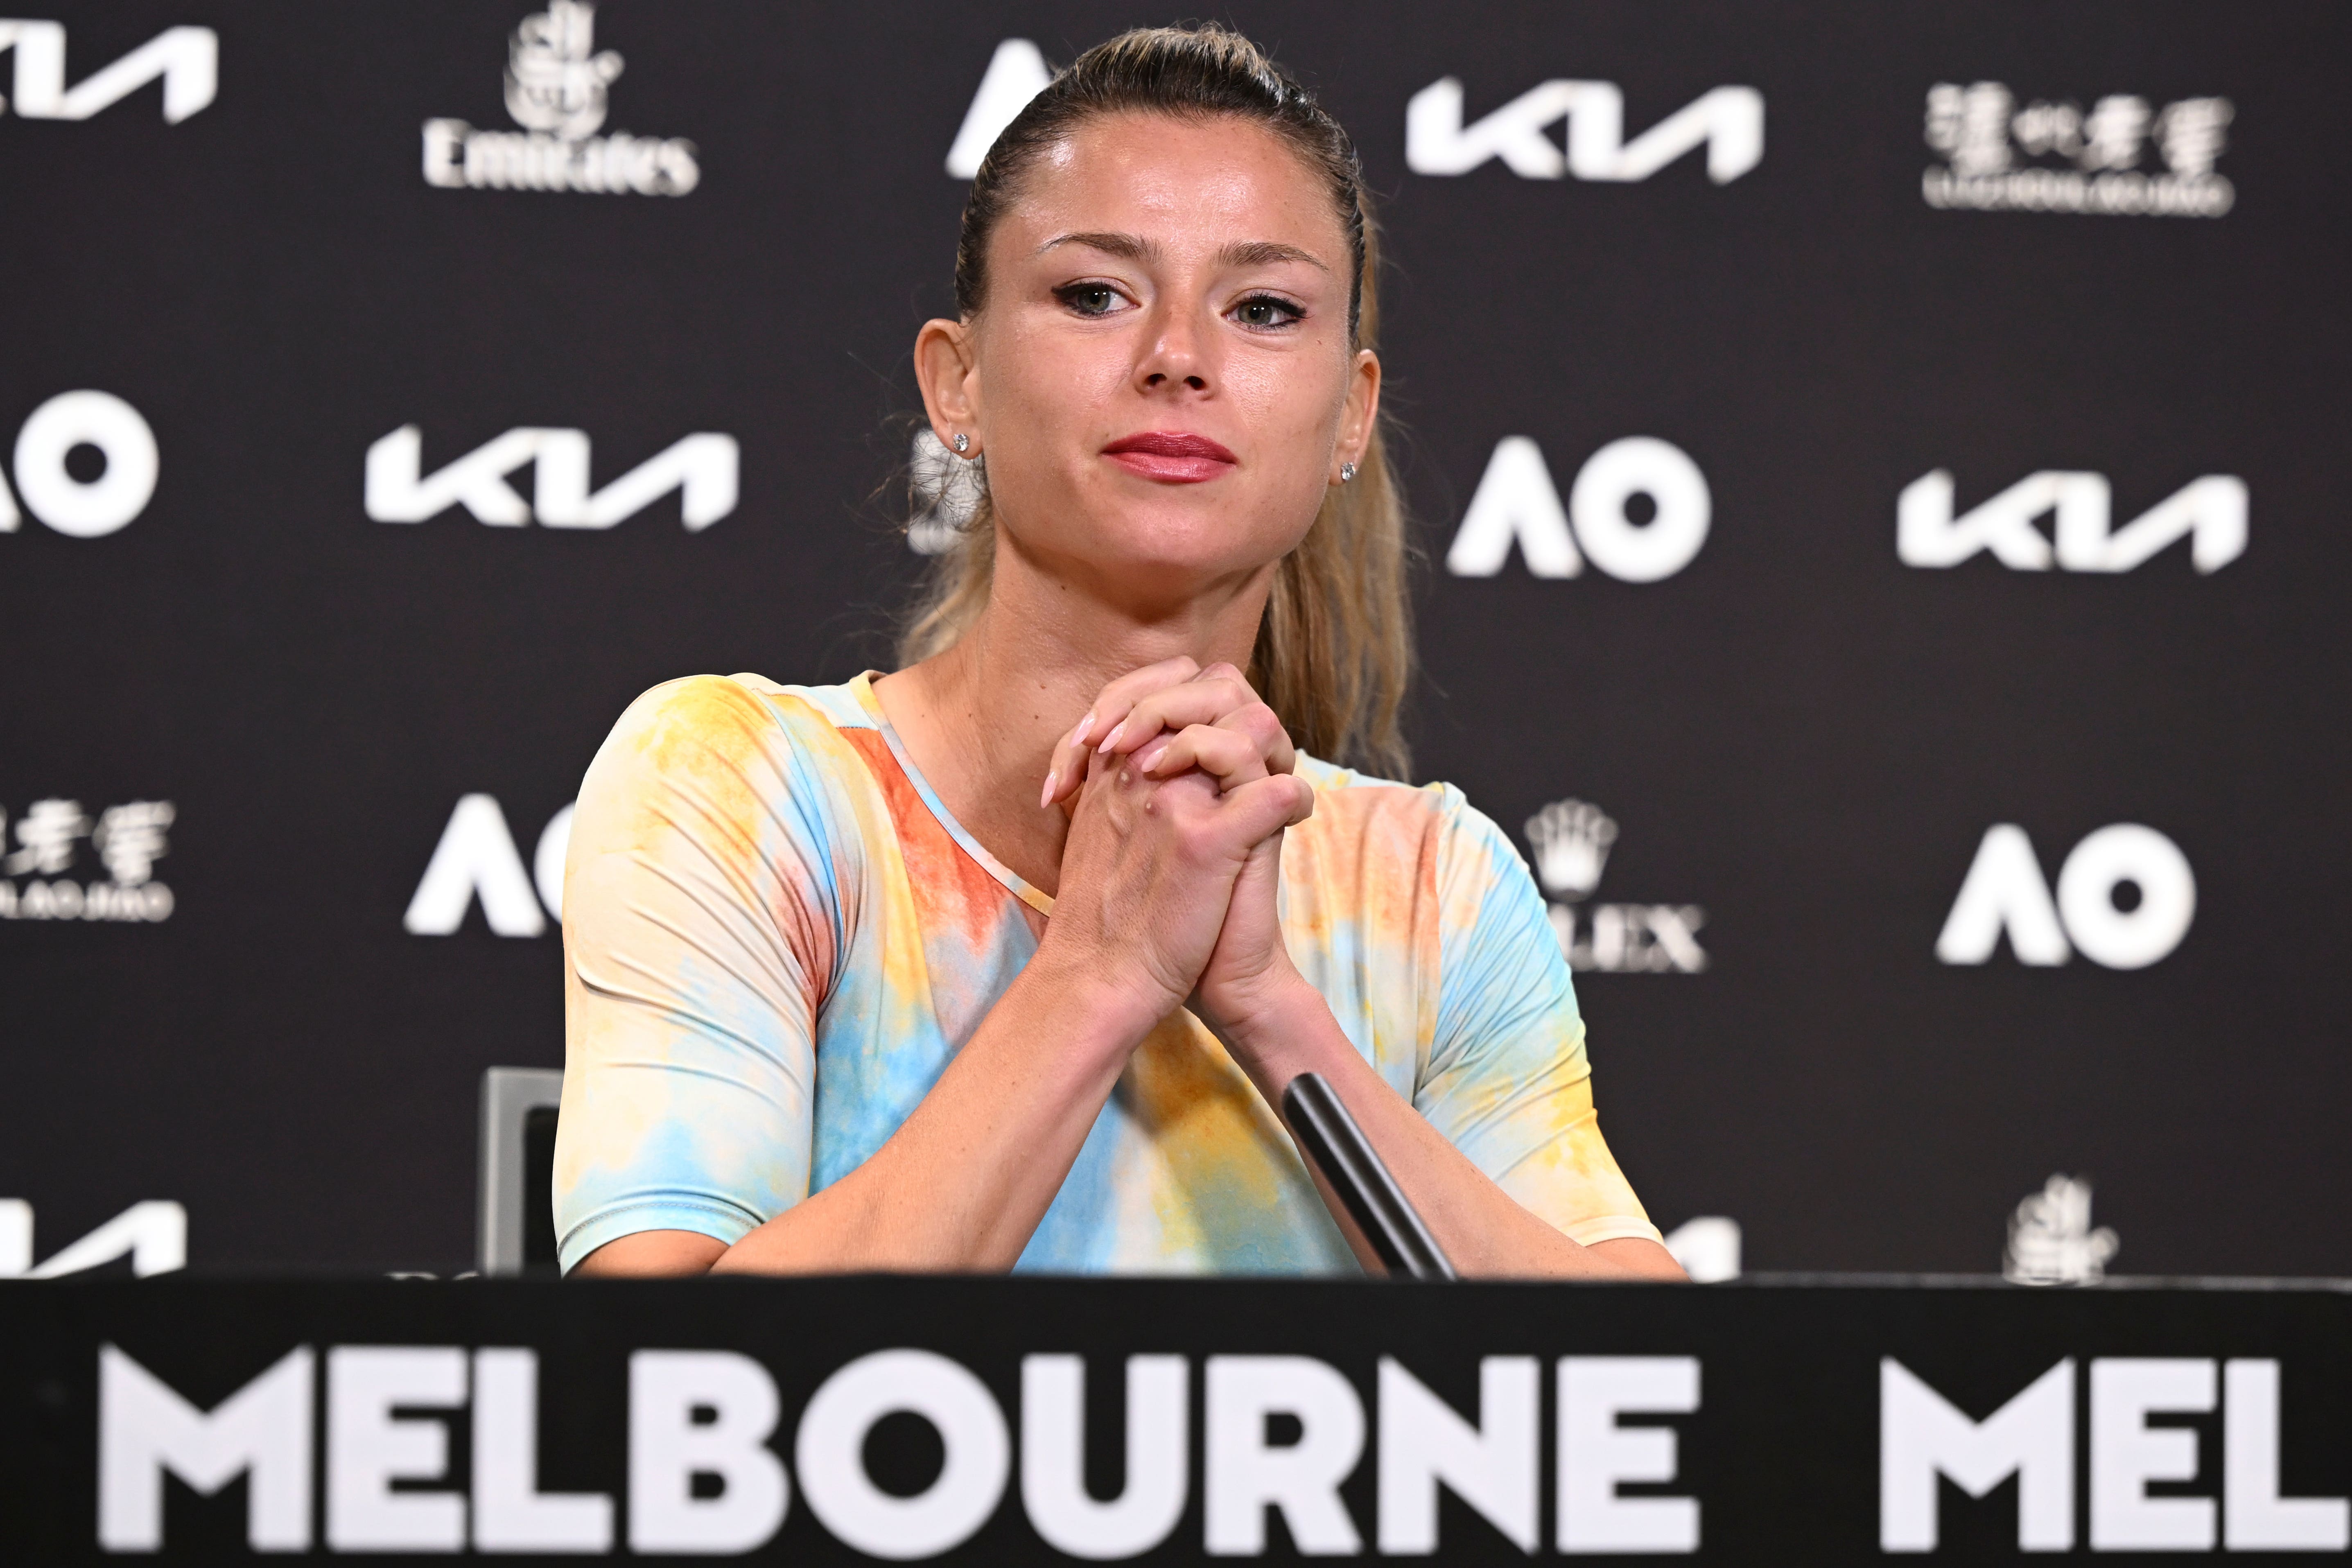 Camila Giorgi answered questions about her vaccination status in a press conference at Melbourne Park (Vince Caligiuri/Tennis Australia/AP)